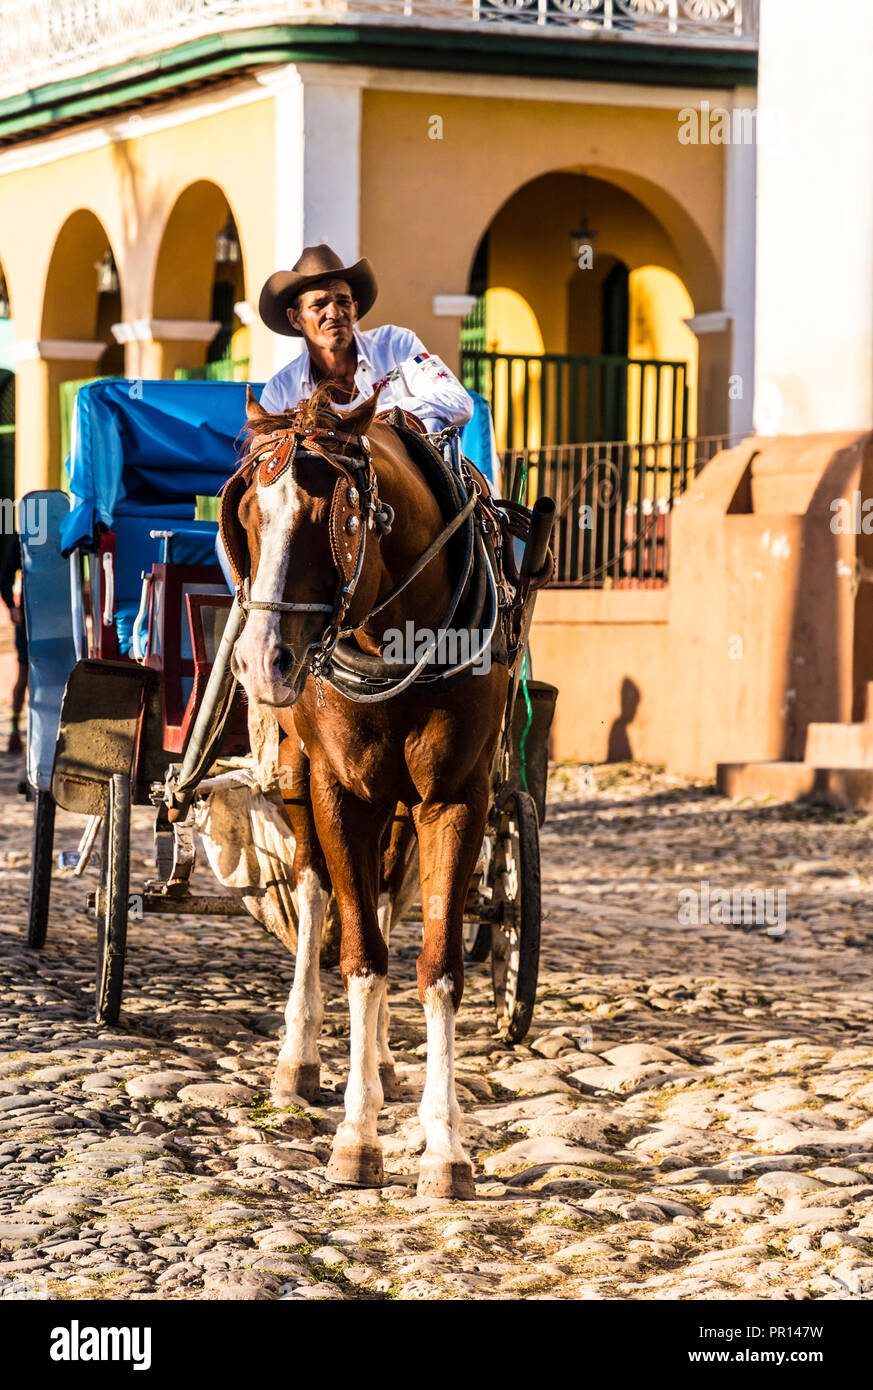 A traditional horse taxi carriage in Trinidad, Cuba, West Indies, Central America Stock Photo